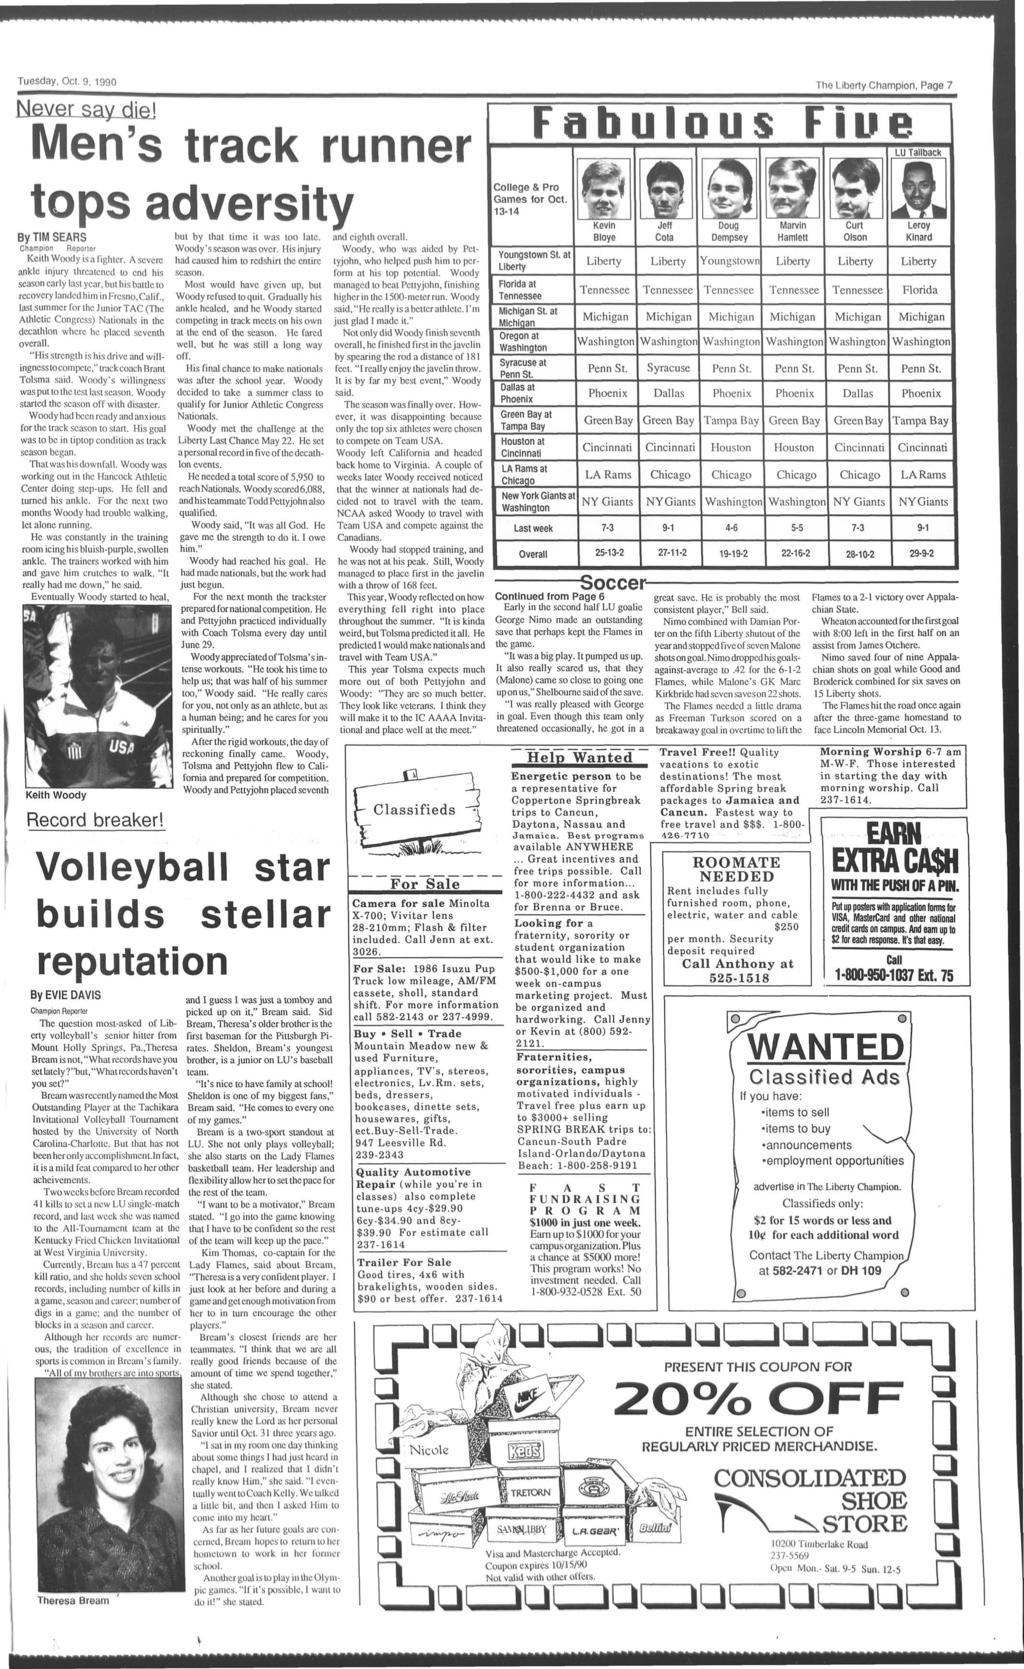 Tuesday, Oct. 9, 1990 The Lberty Champon, Page 7 Nevar say HJP Men's track runner Fabulous Fne LU Talback tops adversty By TM SEARS but by that tme t was too late. and eghth overall.